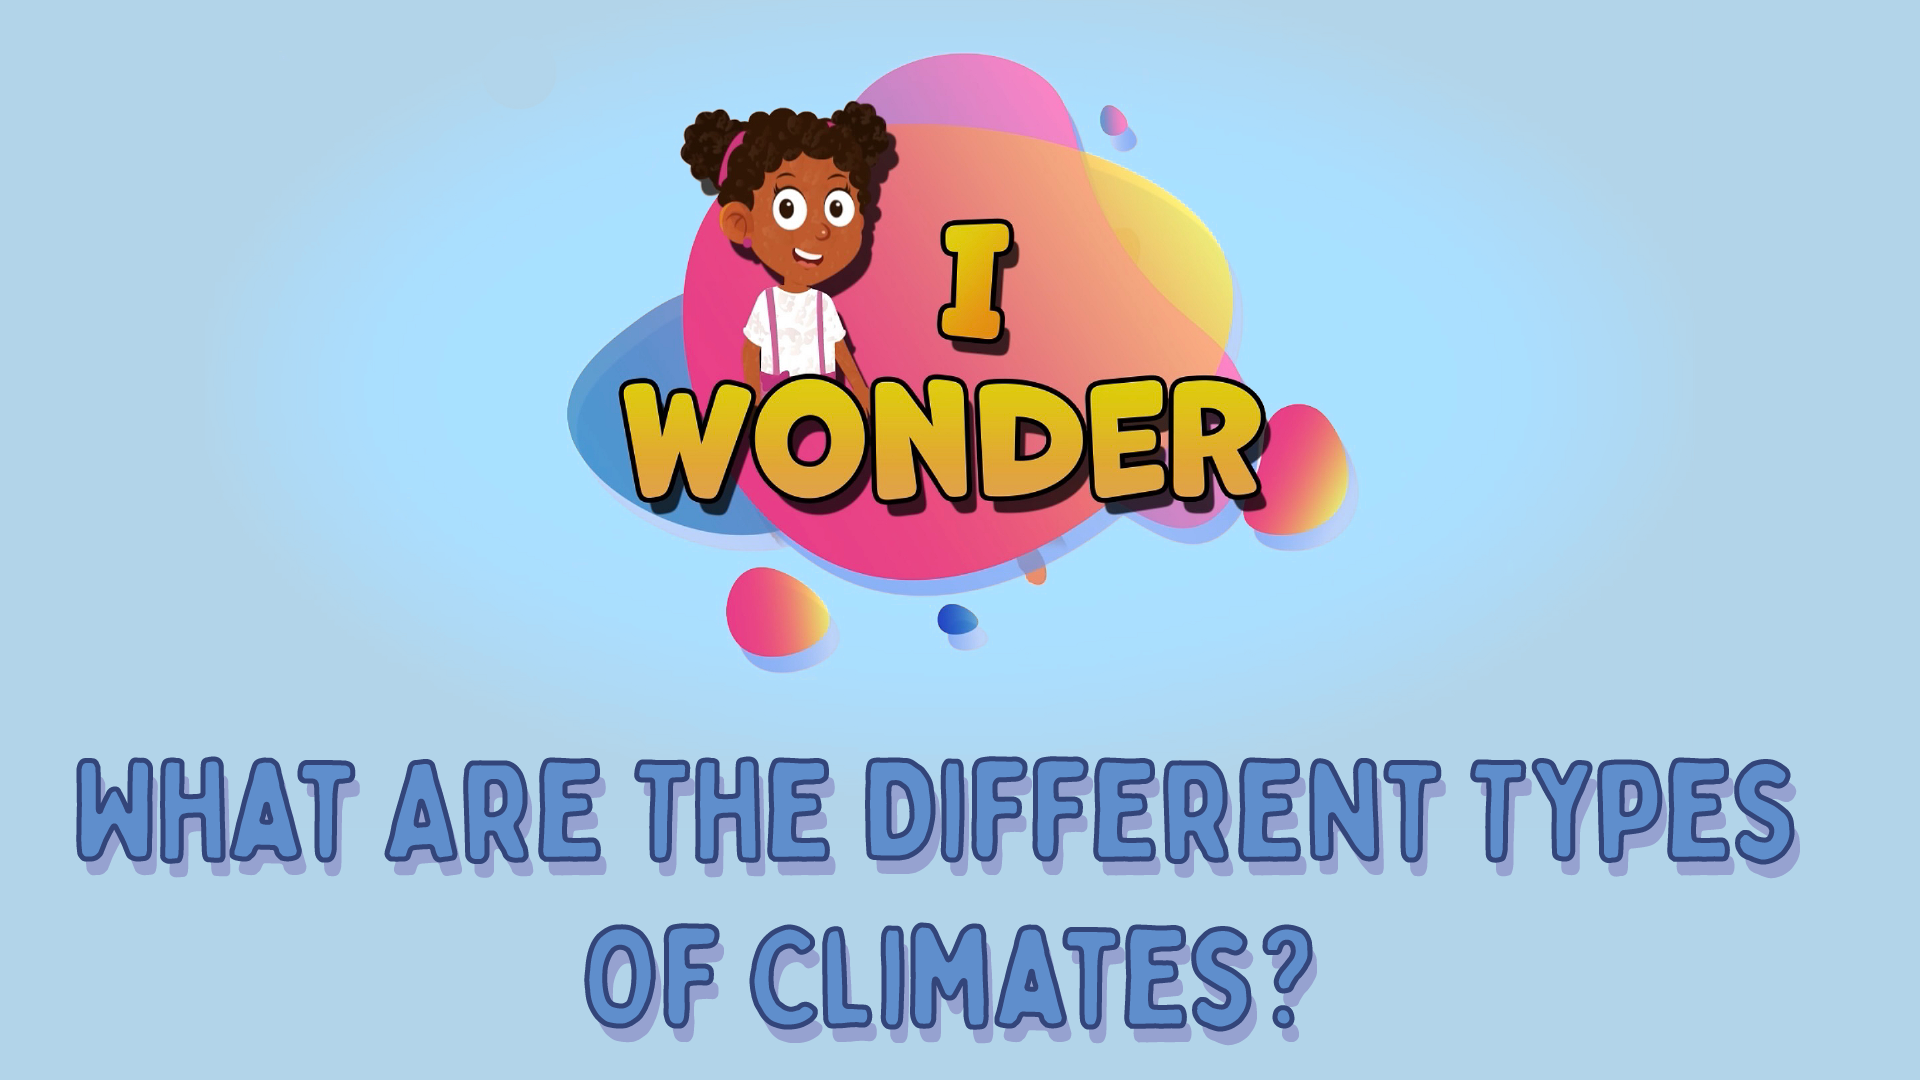 What Are The Different Types Of Climates?